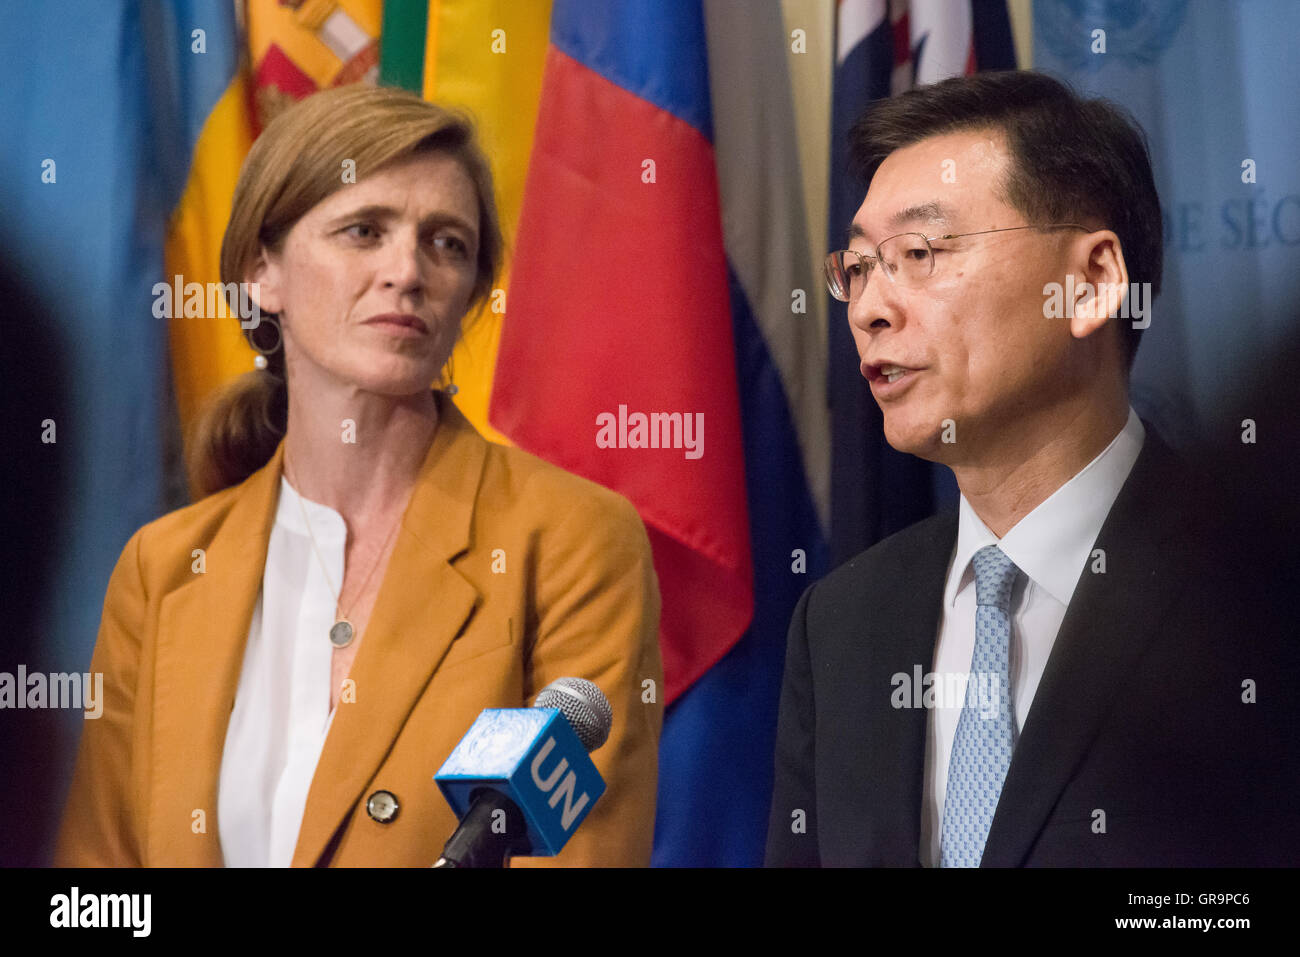 South Korean Deputy Permanent Representative to the UN Hahn Choong-hee (right) speaks with the press. Following the September 5th test launch of what are believed to by three medium-range Rodong-class ballistic missiles by the Democratic People's Republic of Korea (DPRK) toward Japan, the United Nations Security Council held emergency consultations on the incident. Analysts believe that the test, conducted while world leaders met in China for the G20 summit, may have been conducted as a response to the possible installation of a Terminal High Altitude Area Defense (THAAD) system developed to Stock Photo